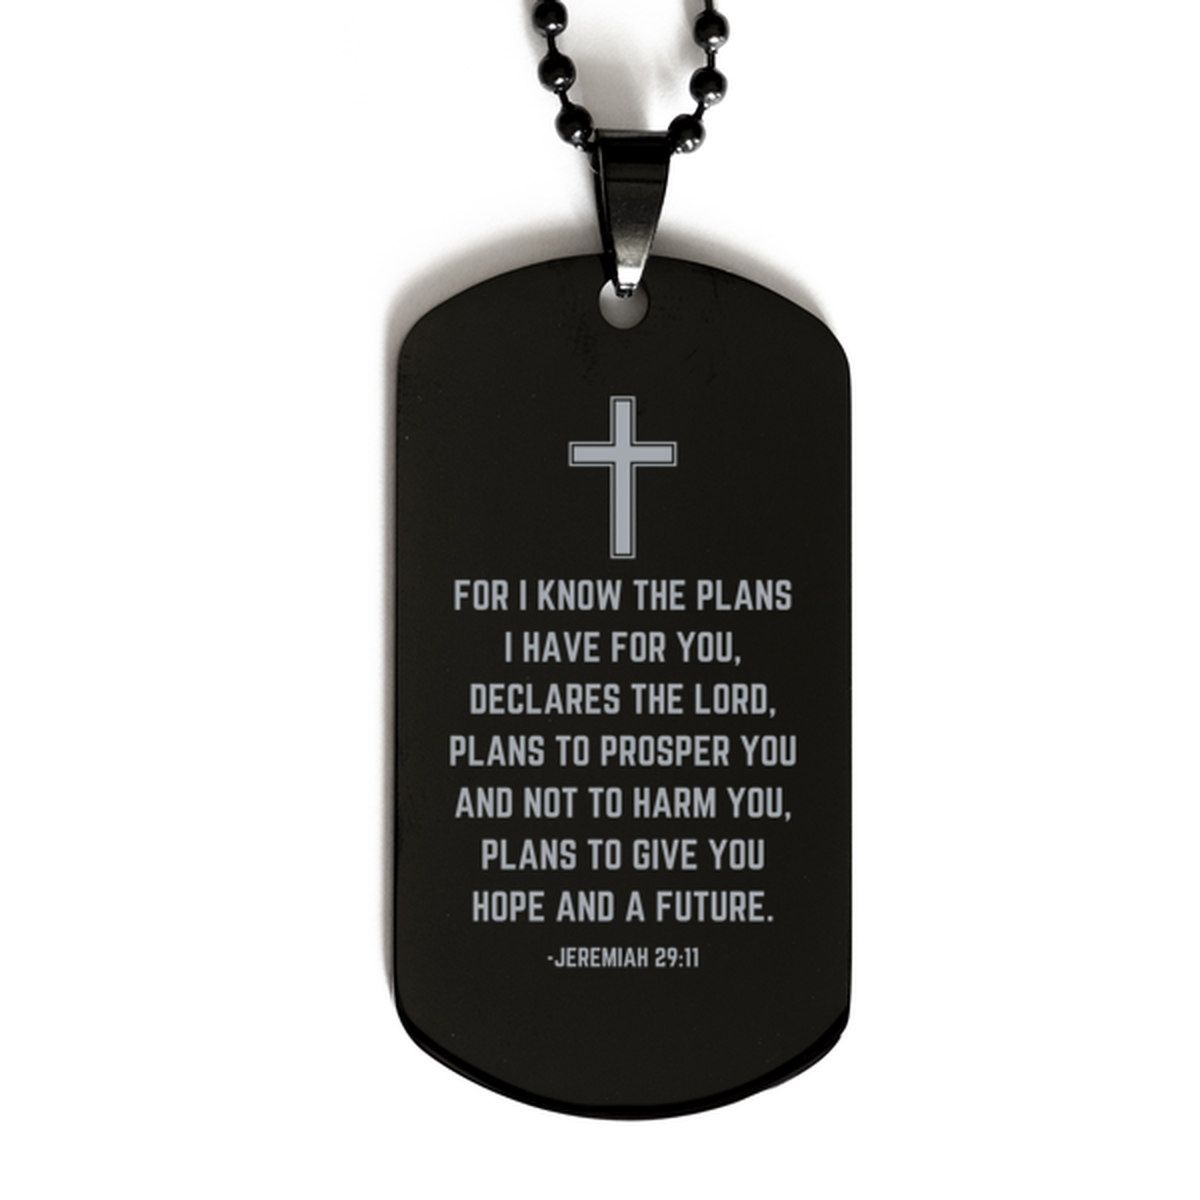 Baptism Gifts For Teenage Boys Girls, Christian Bible Verse Black Dog Tag, For I know the plans, Confirmation Gifts, Bible Verse Necklace for Son, Godson, Grandson, Nephew